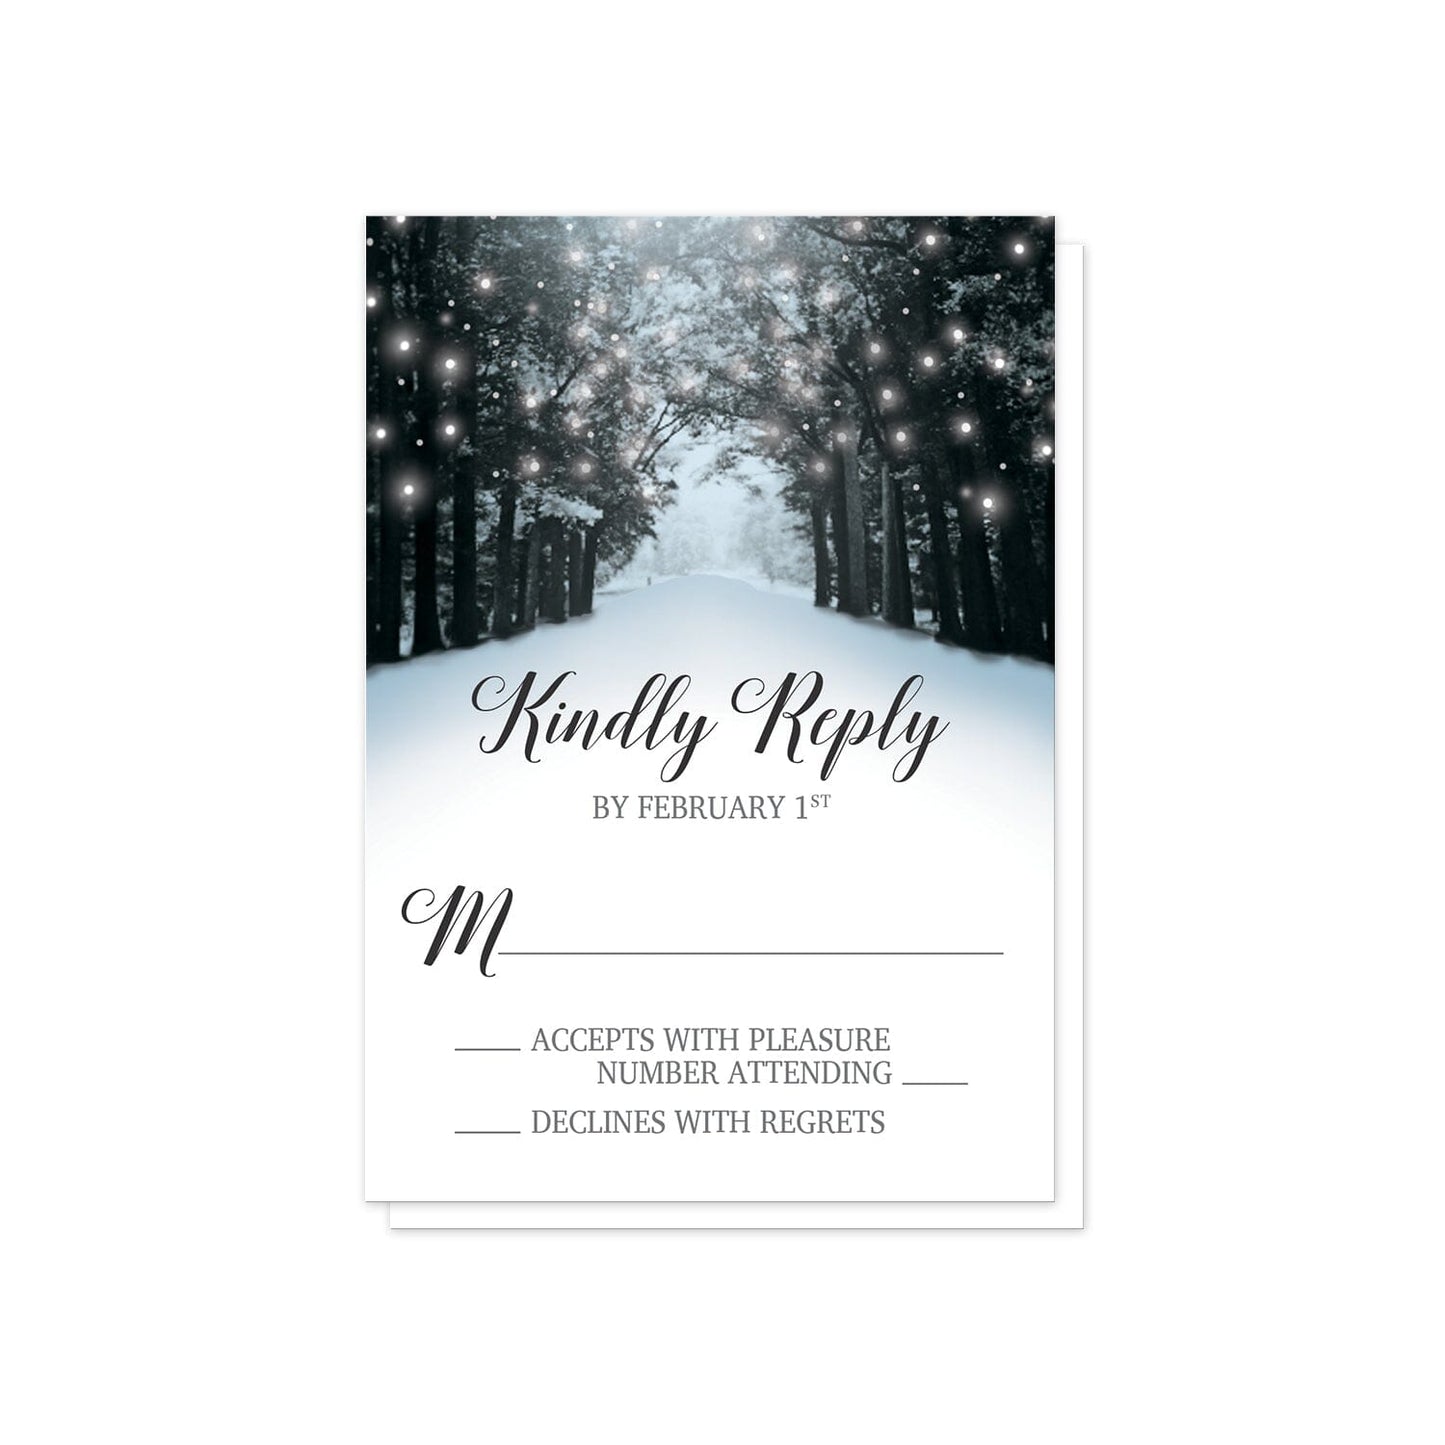 Snowy Winter Road Tree Lights RSVP Cards at Artistically Invited.